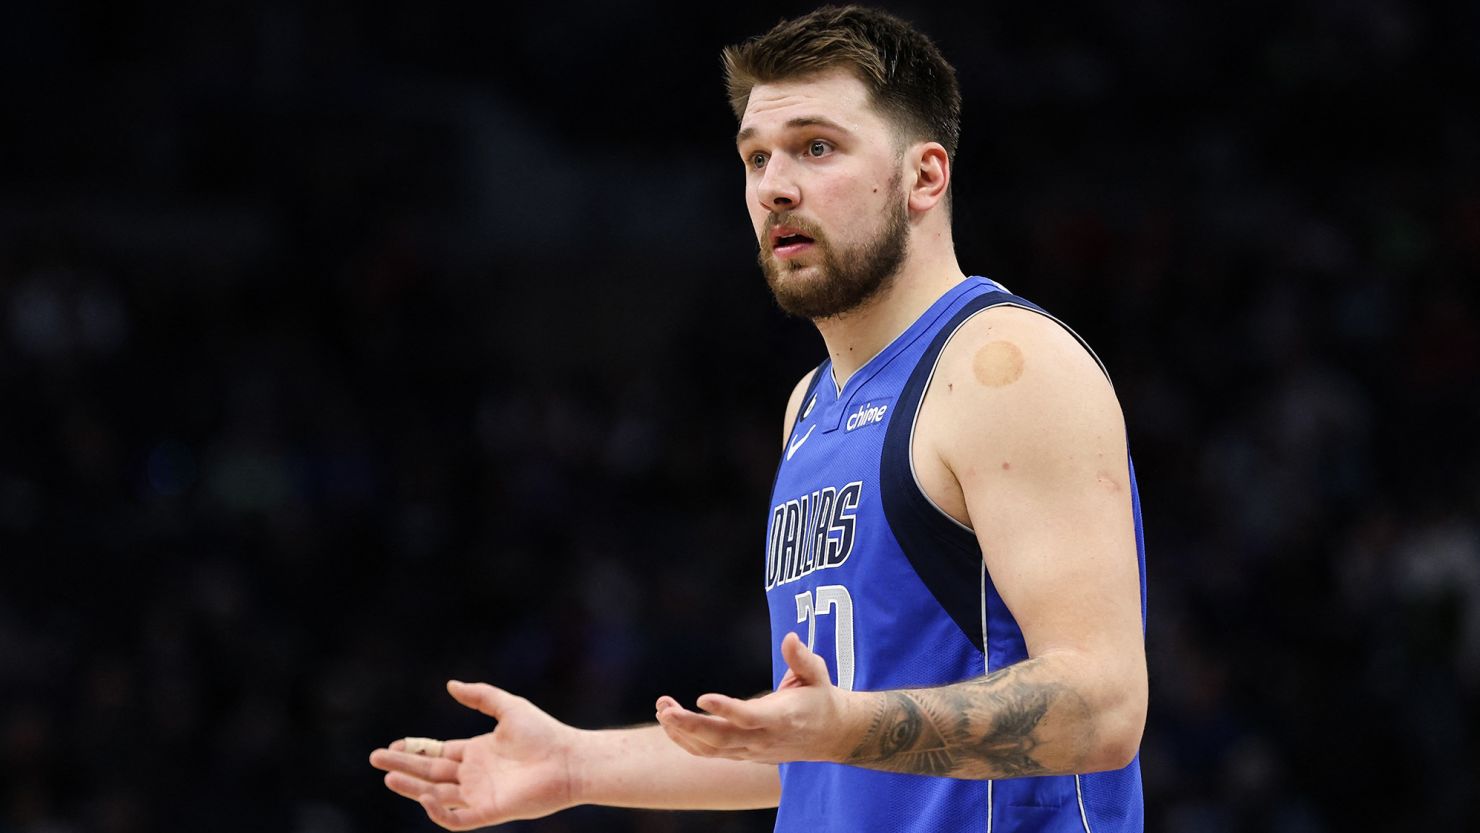 Dončić reacts after being ejected from the game against the Minnesota Timberwolves.